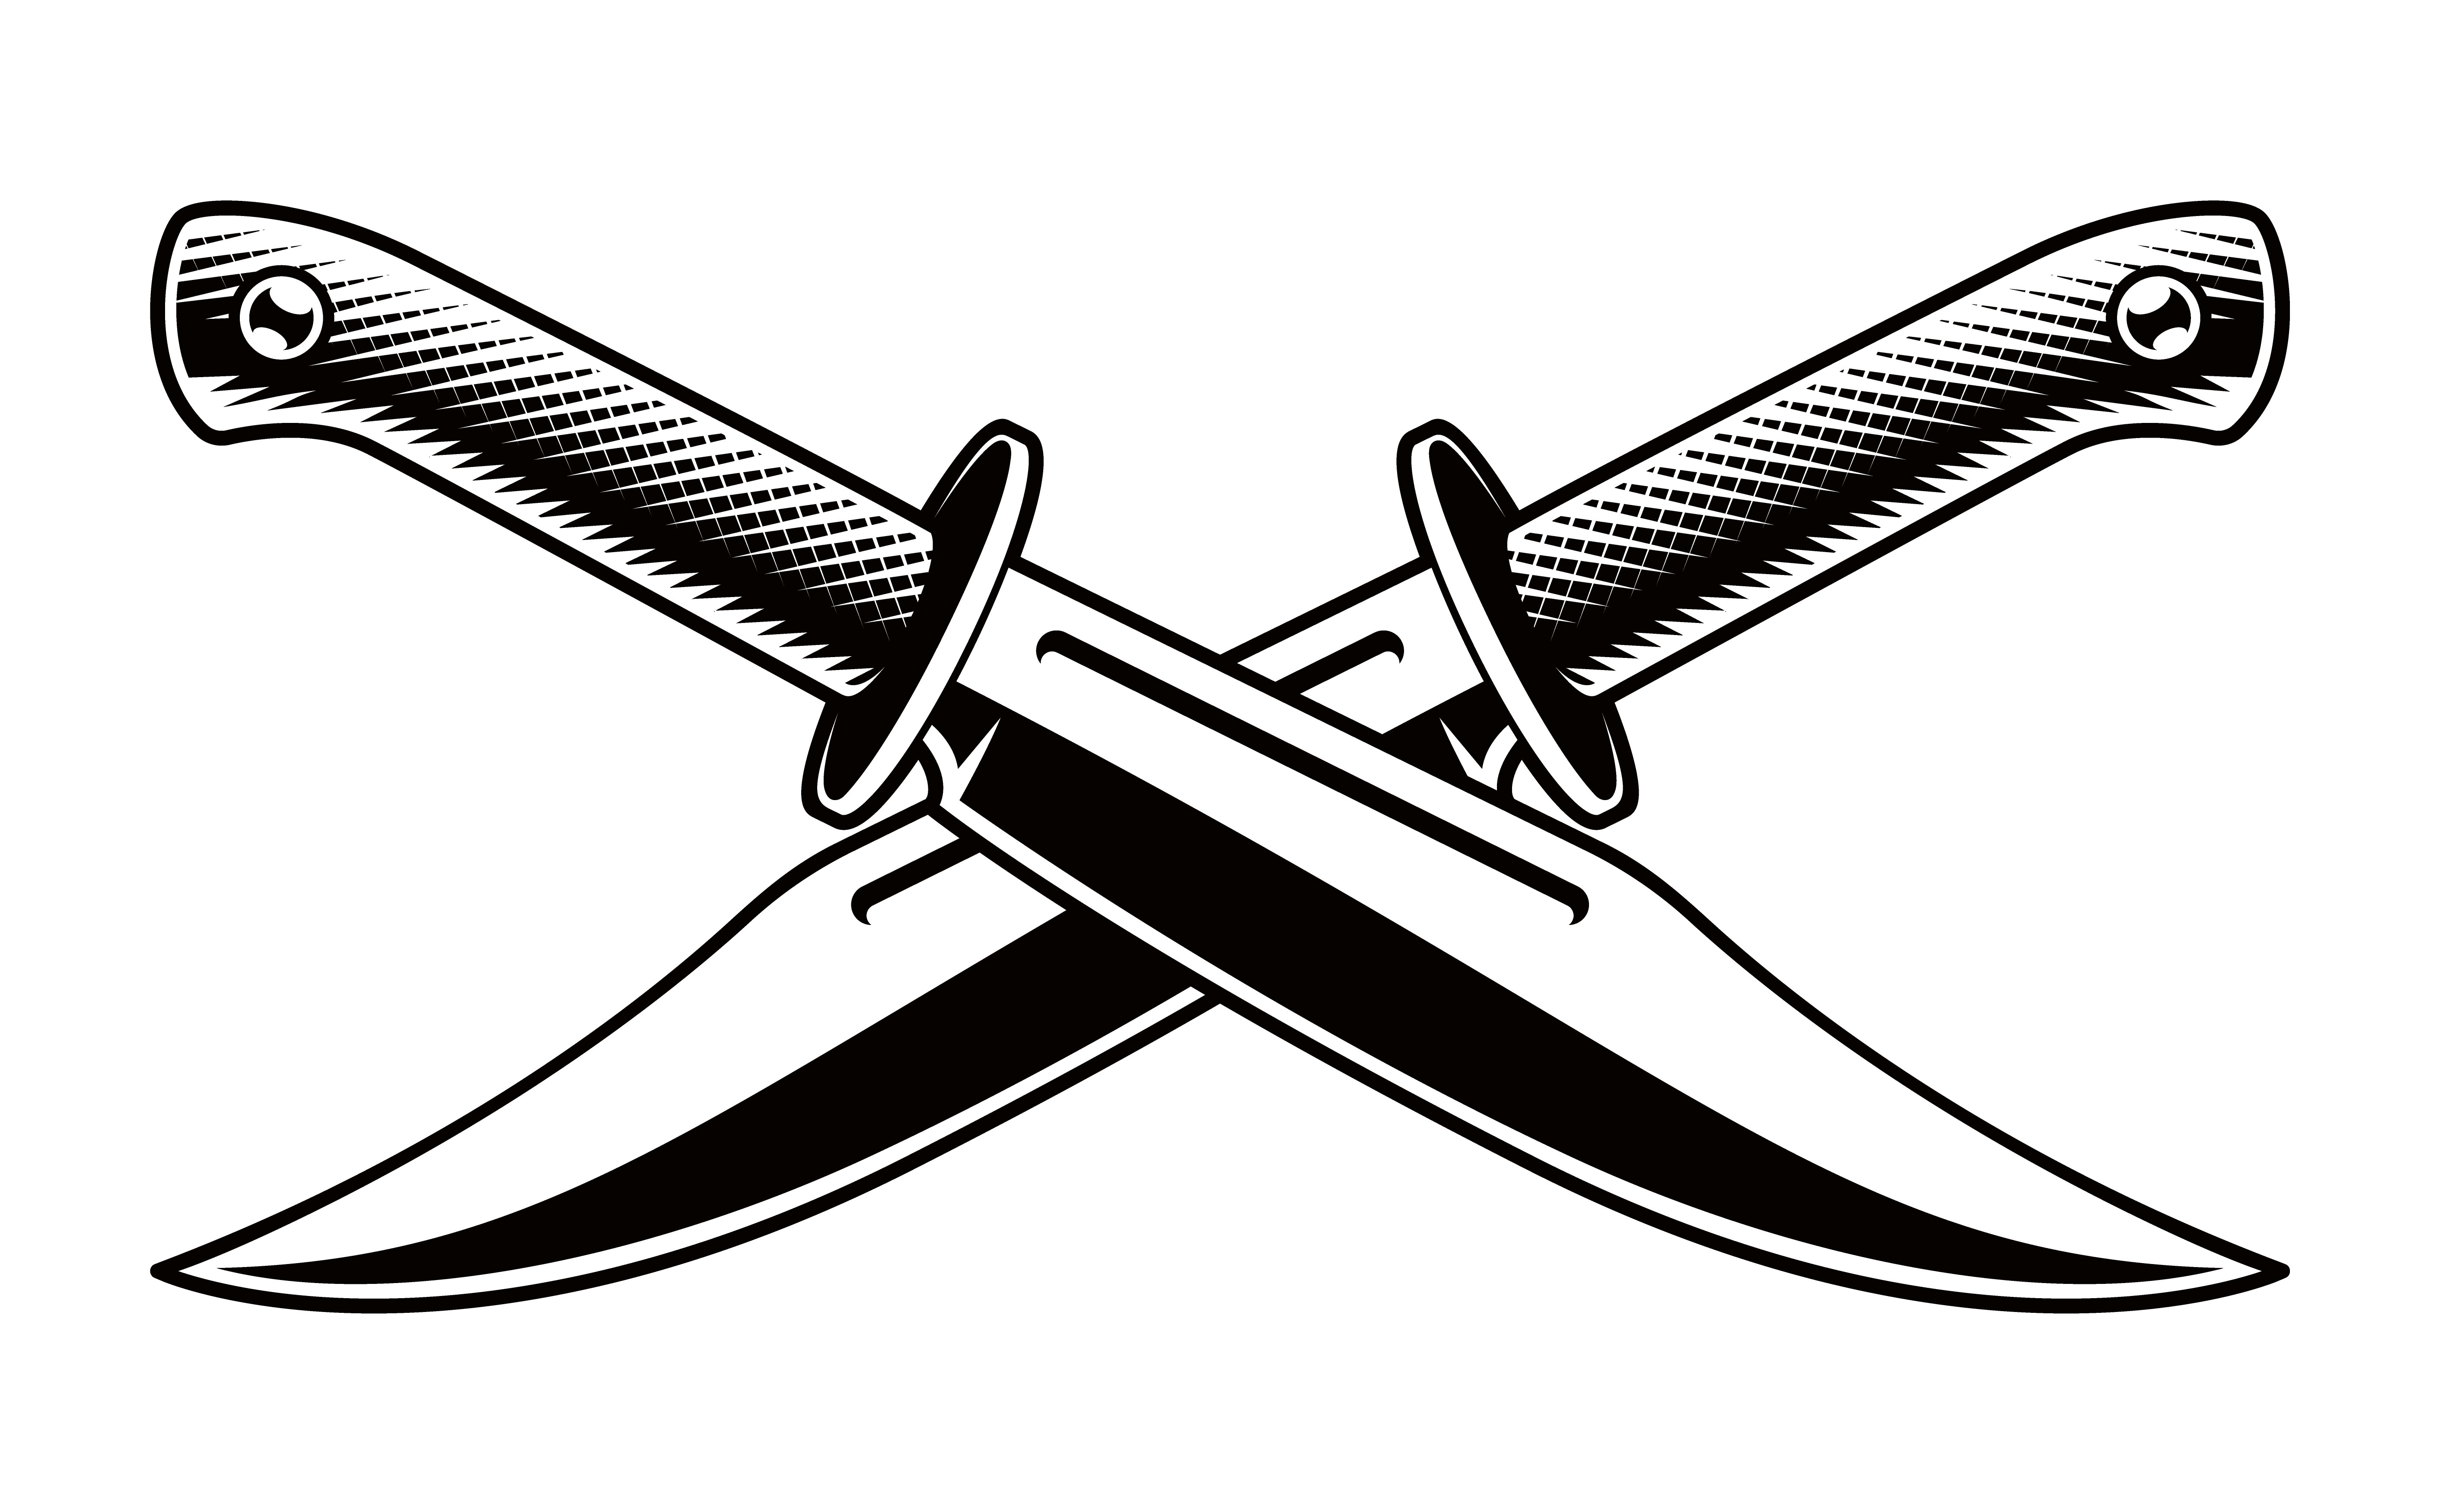 Download Vector illustration of crossed knives on white background ...